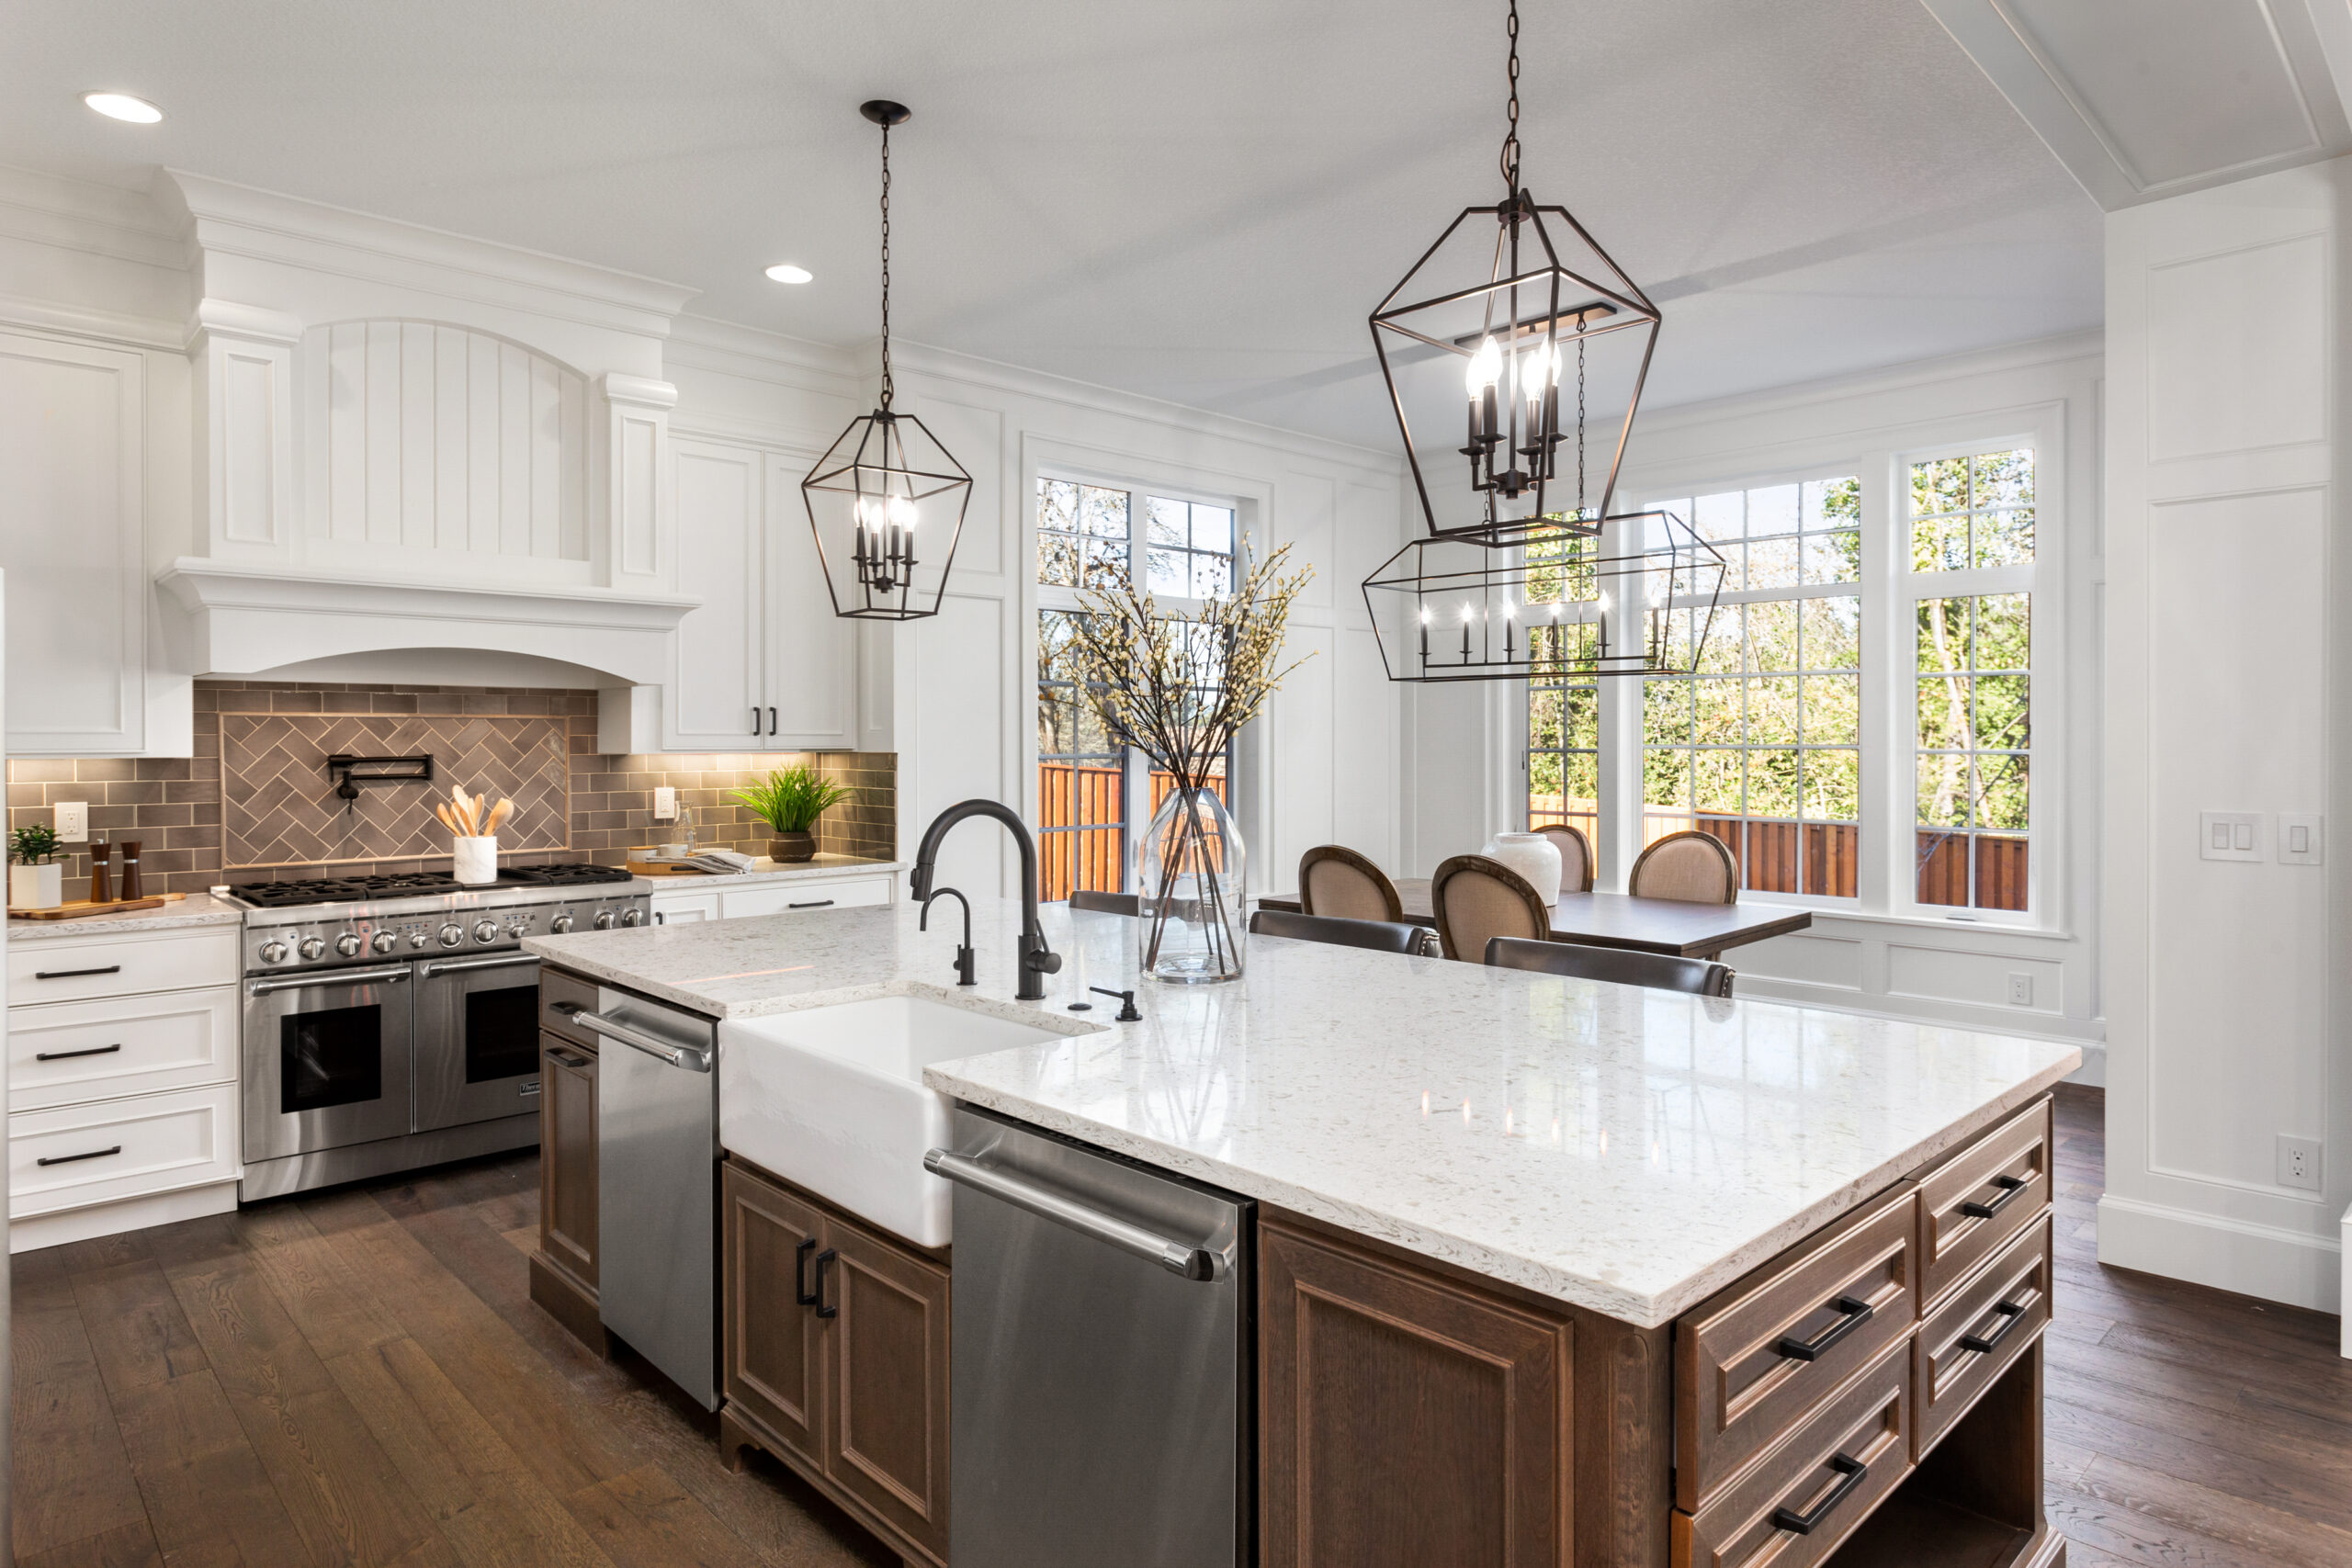 professional kitchen remodels tulsa area contractor